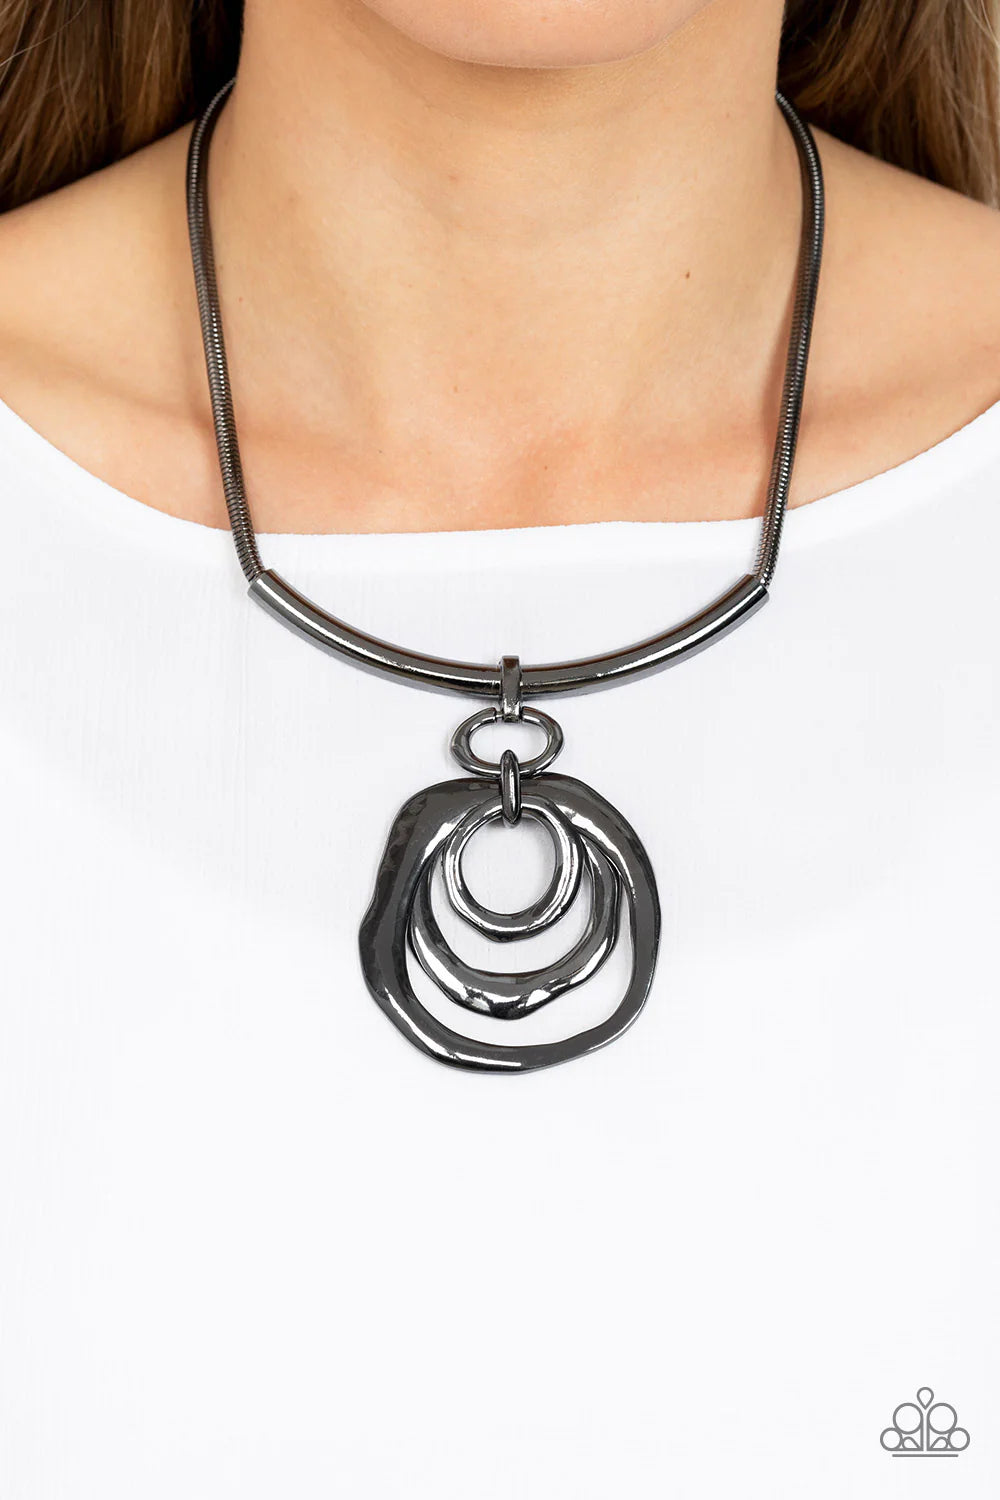 Paparazzi Accessories Forged in Fabulous - Black Warped gunmetal hoops glisten from the bottom of a bowing gunmetal bar set in the center of a rounded gunmetal snake chain, resulting in a contemporary centerpiece below the collar. Features an adjustable c